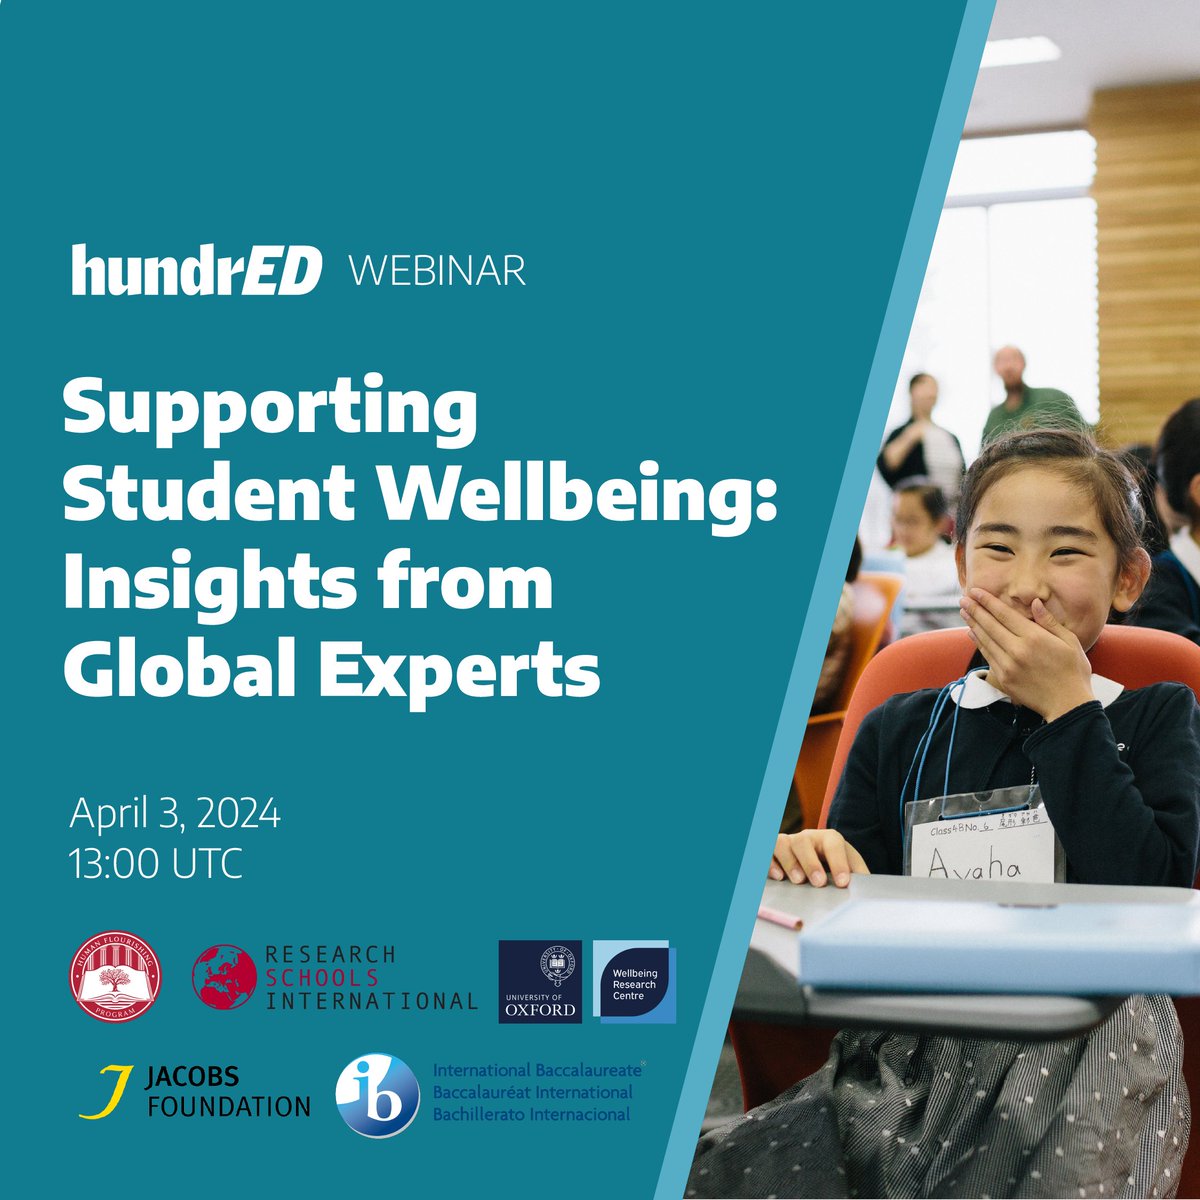 The Supporting Student Wellbeing: Insights from Global Experts Webinar is starting in 2 hours! ⌛ Hear from experts on #wellbeing about how we can support students. Join us on Zoom: loom.ly/61vyaRA